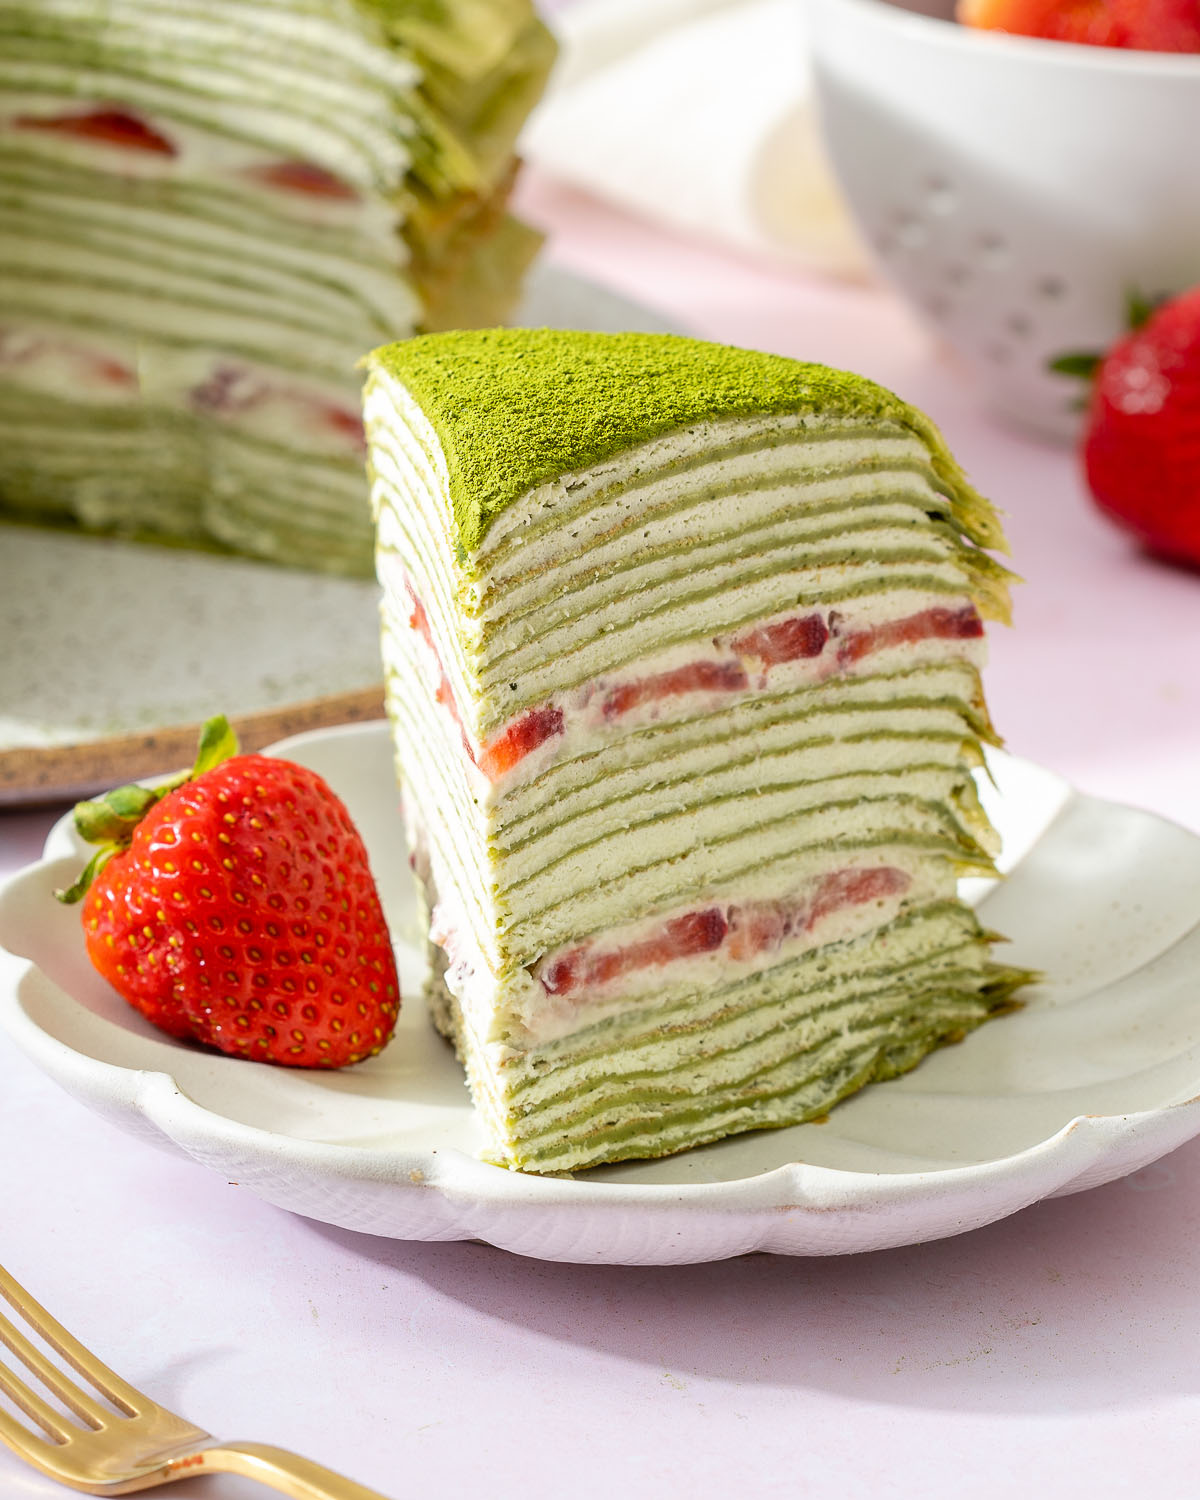 Up close of a slice of matcha crepe cake on a plate with a strawberry.